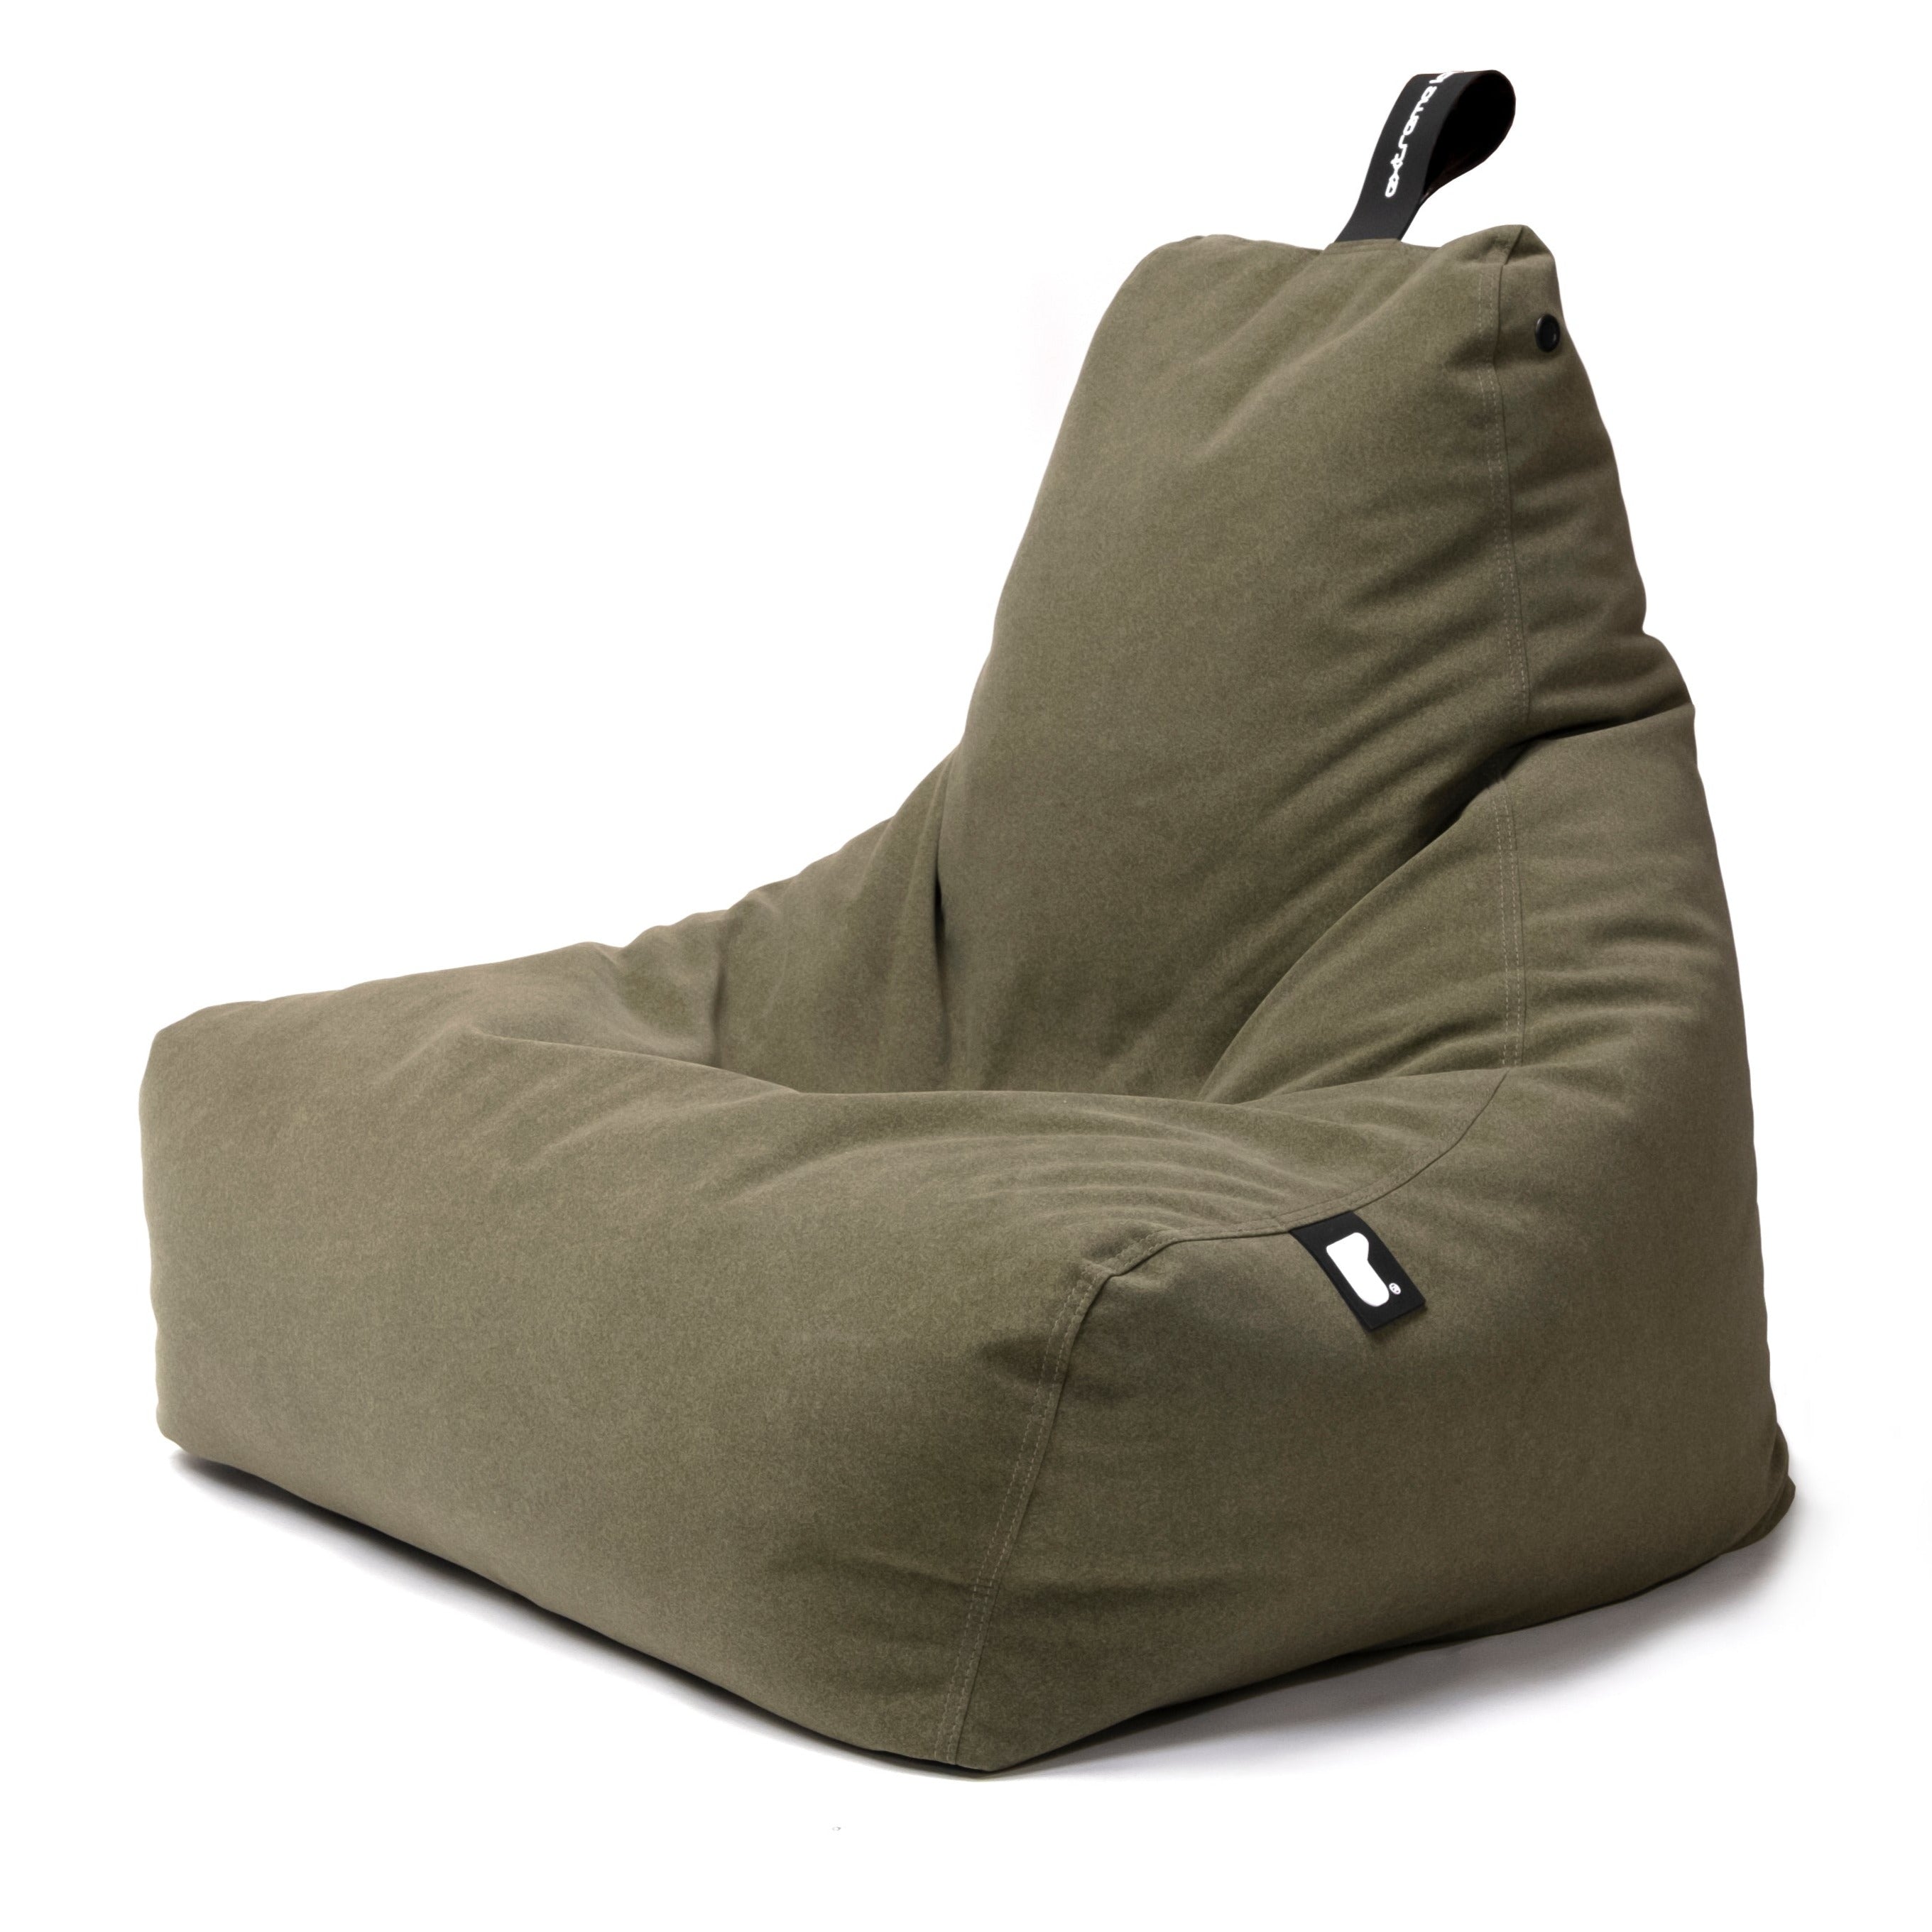 ORKA Classic XXXL with Footstool Bean Bag Cover Without Beans - Brown -  Home Decor Lo